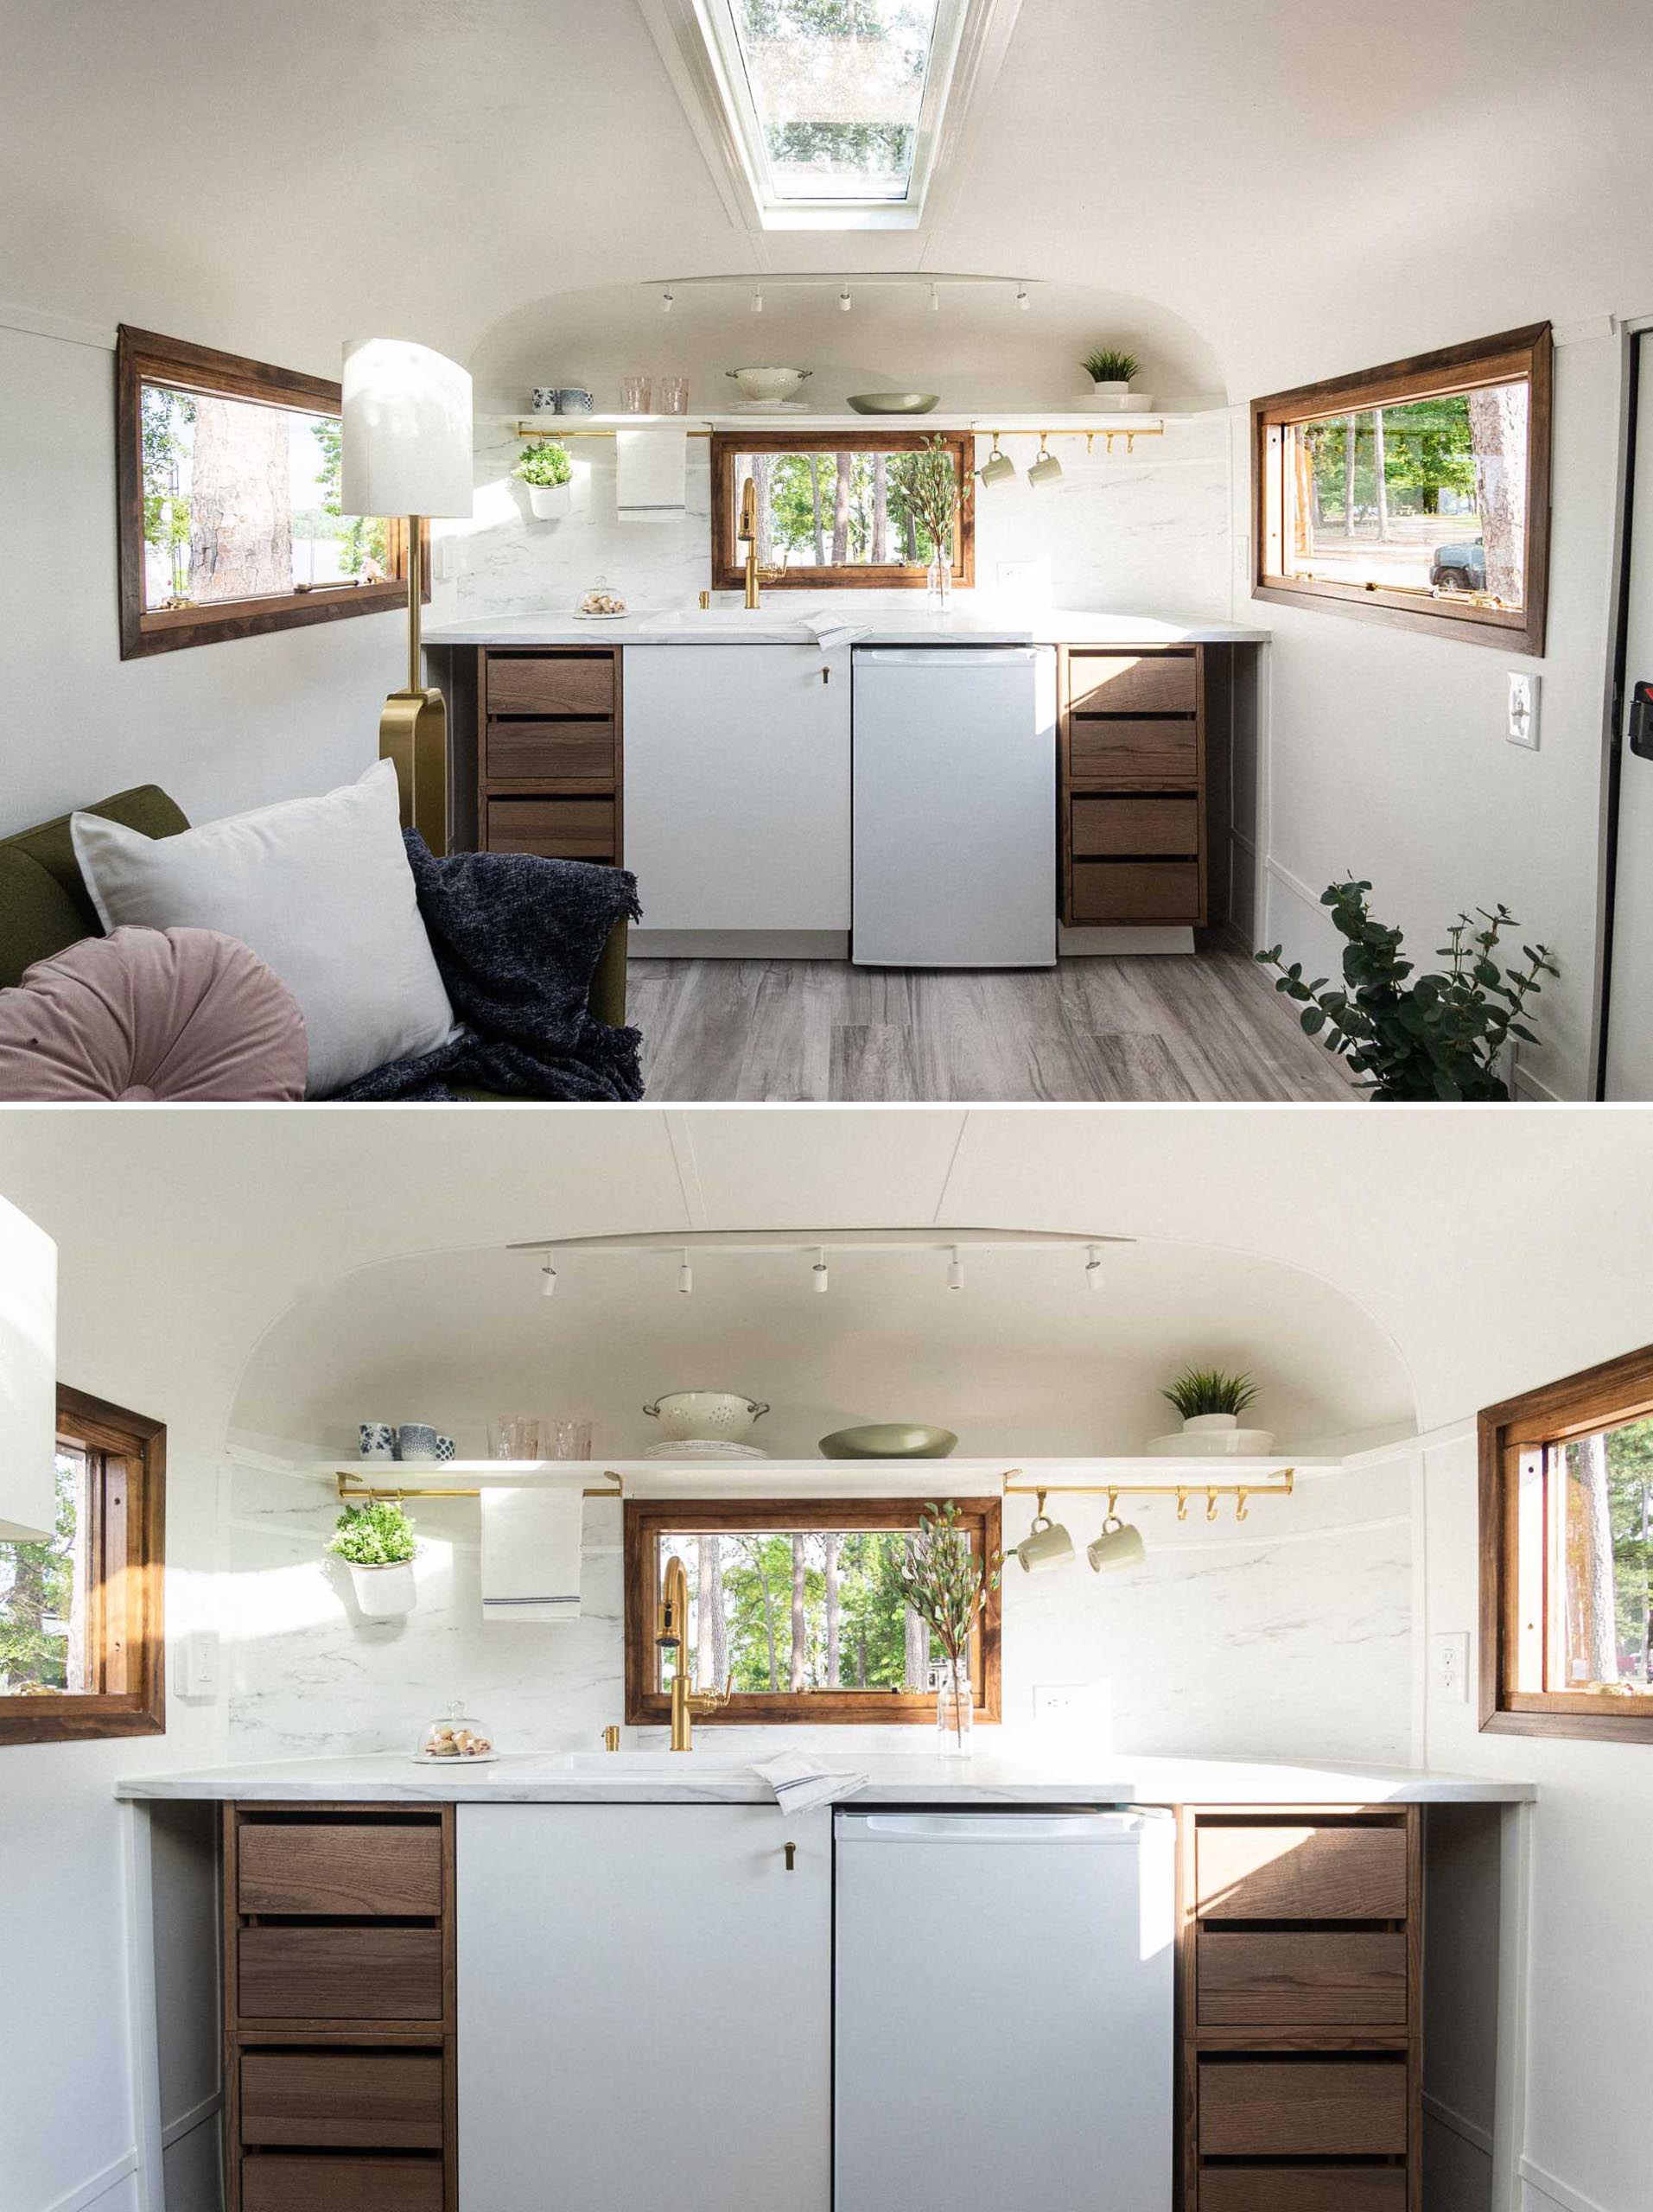 The remodeled kitchen of this vintage travel trailer includes wood cabinetry, a shelf, and a light colored countertop.